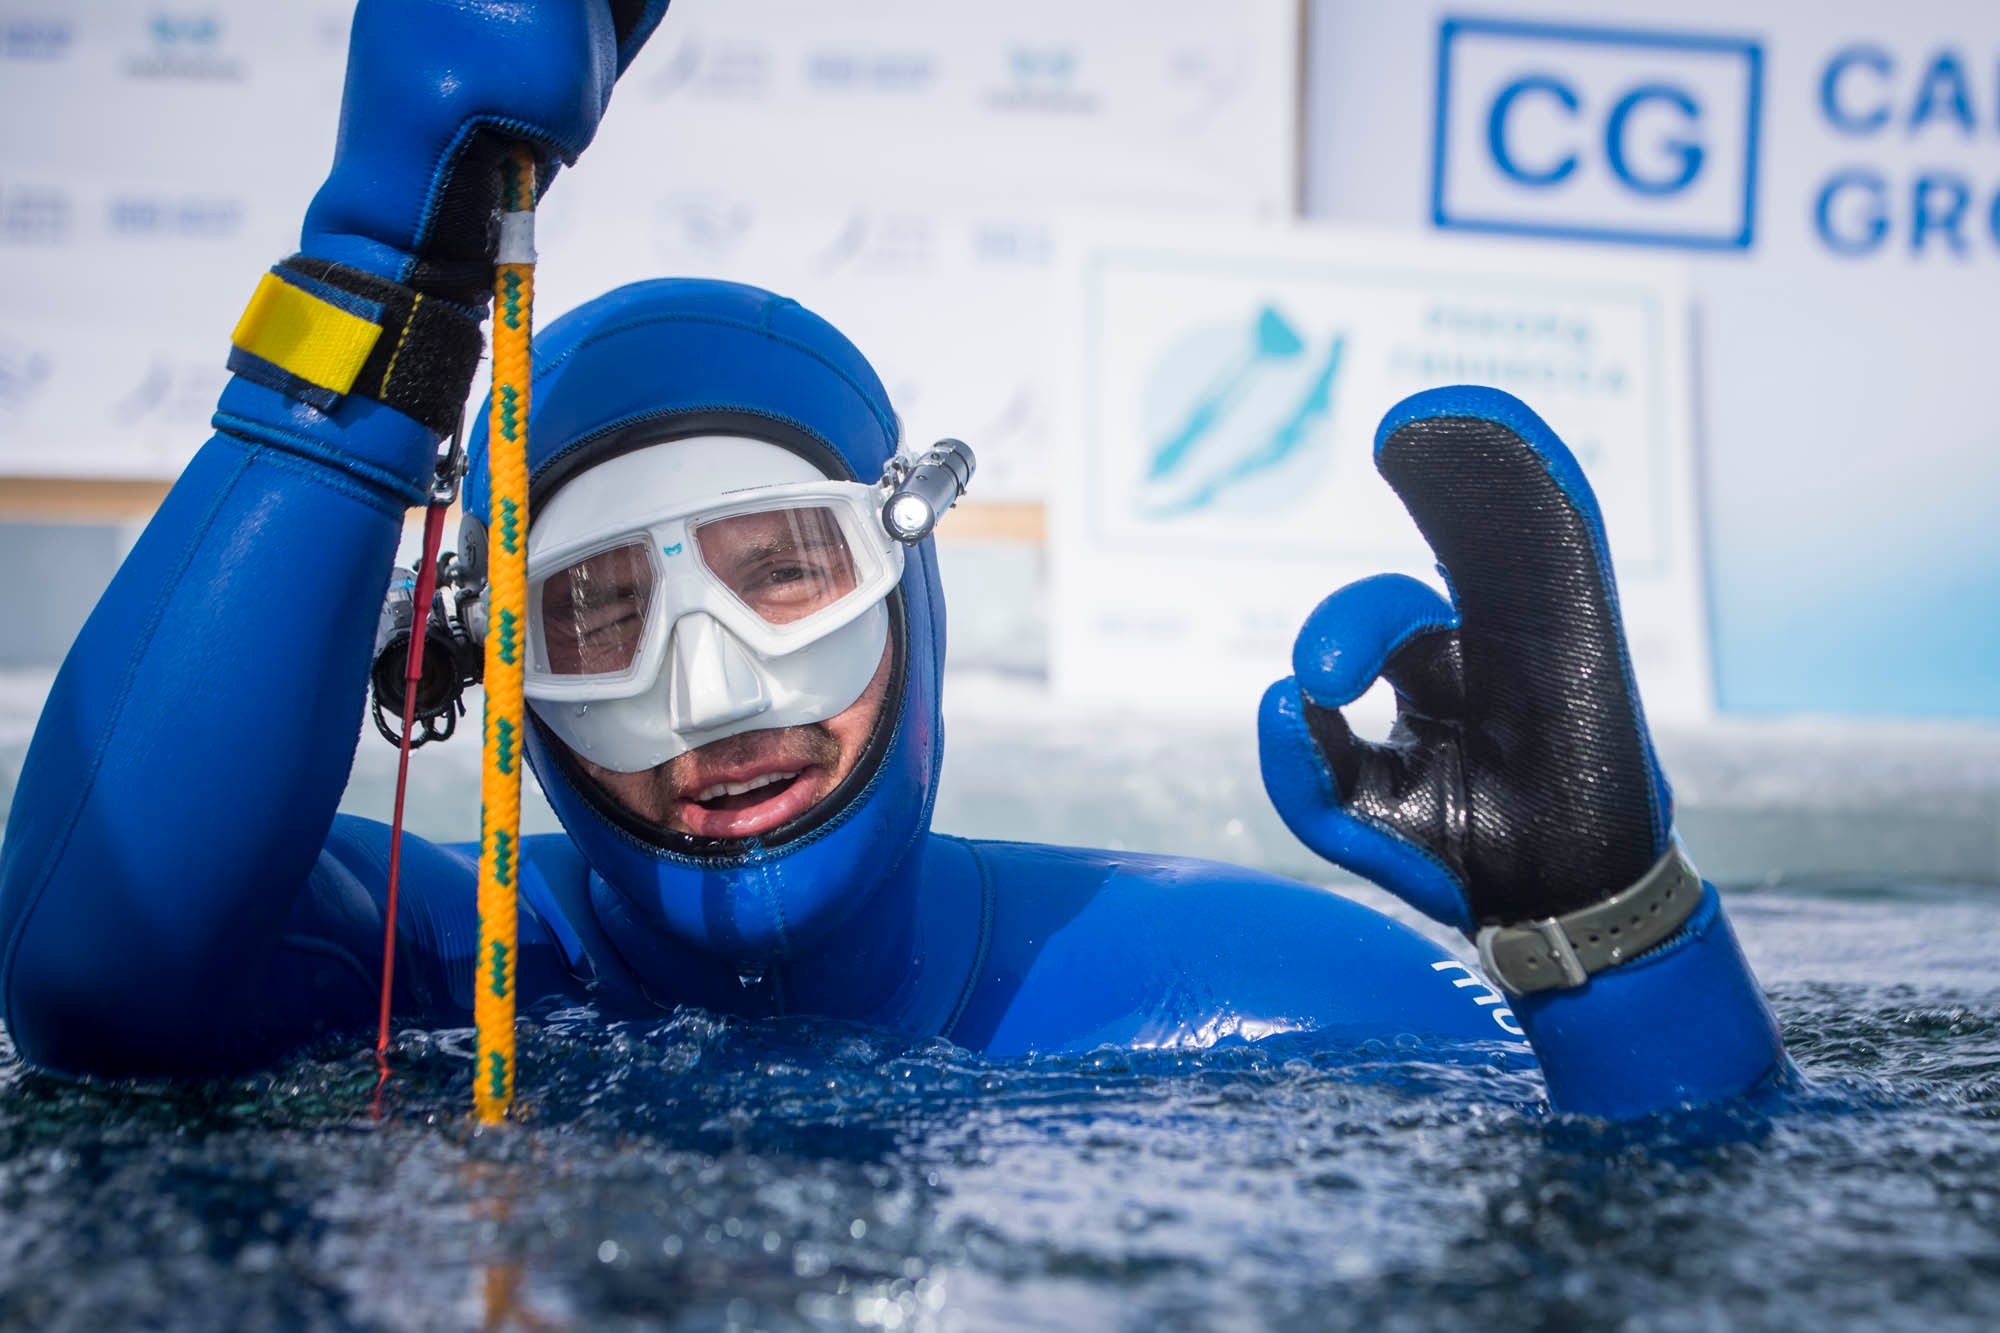 Press Release - Molchanovs Athletes Set 2 New Guinness World Records for Under Ice Diving